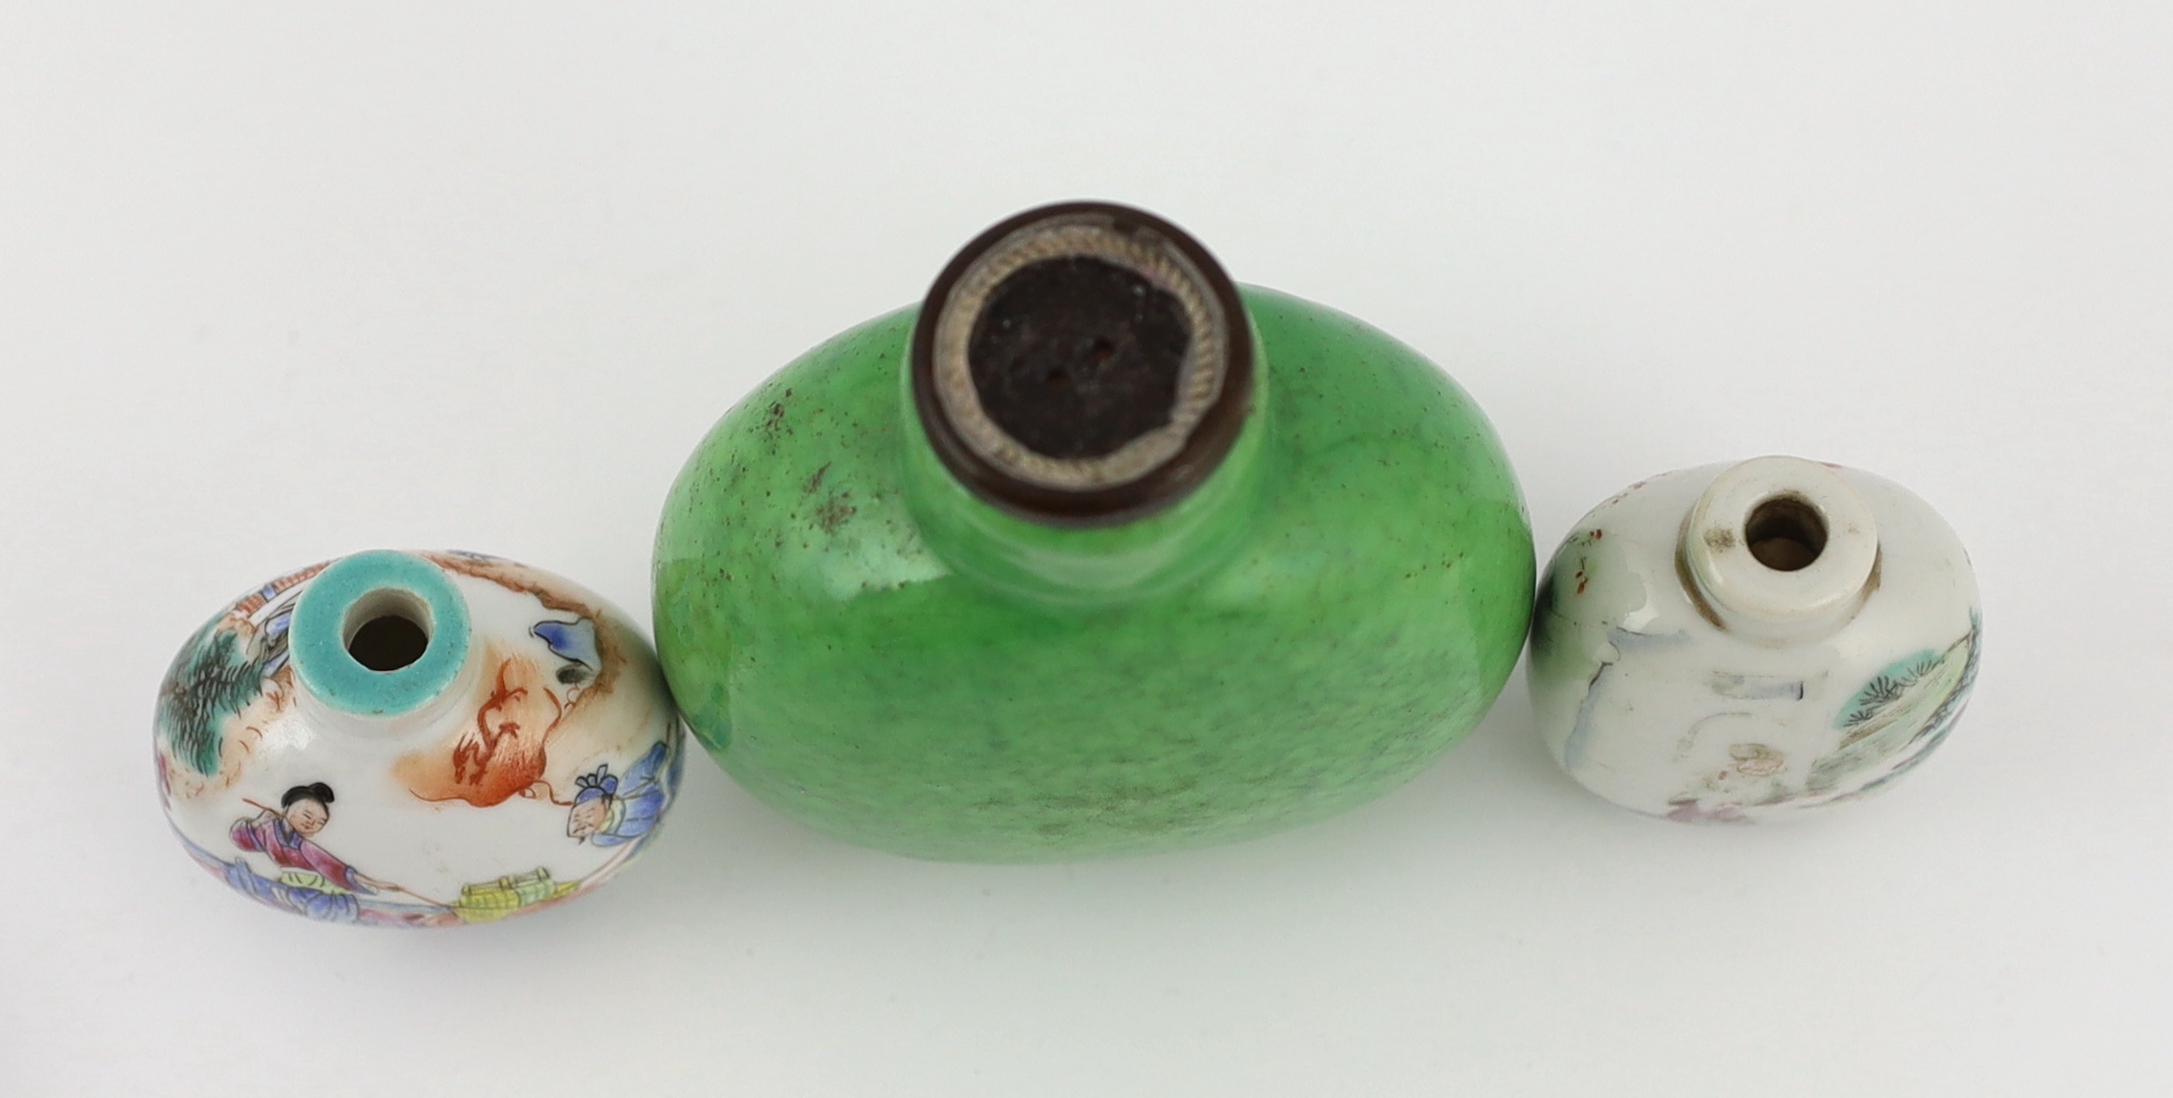 A large Chinese green crackle glazed snuff bottle, Daoguang mark and period, and three other 19th century porcelain snuff bottles